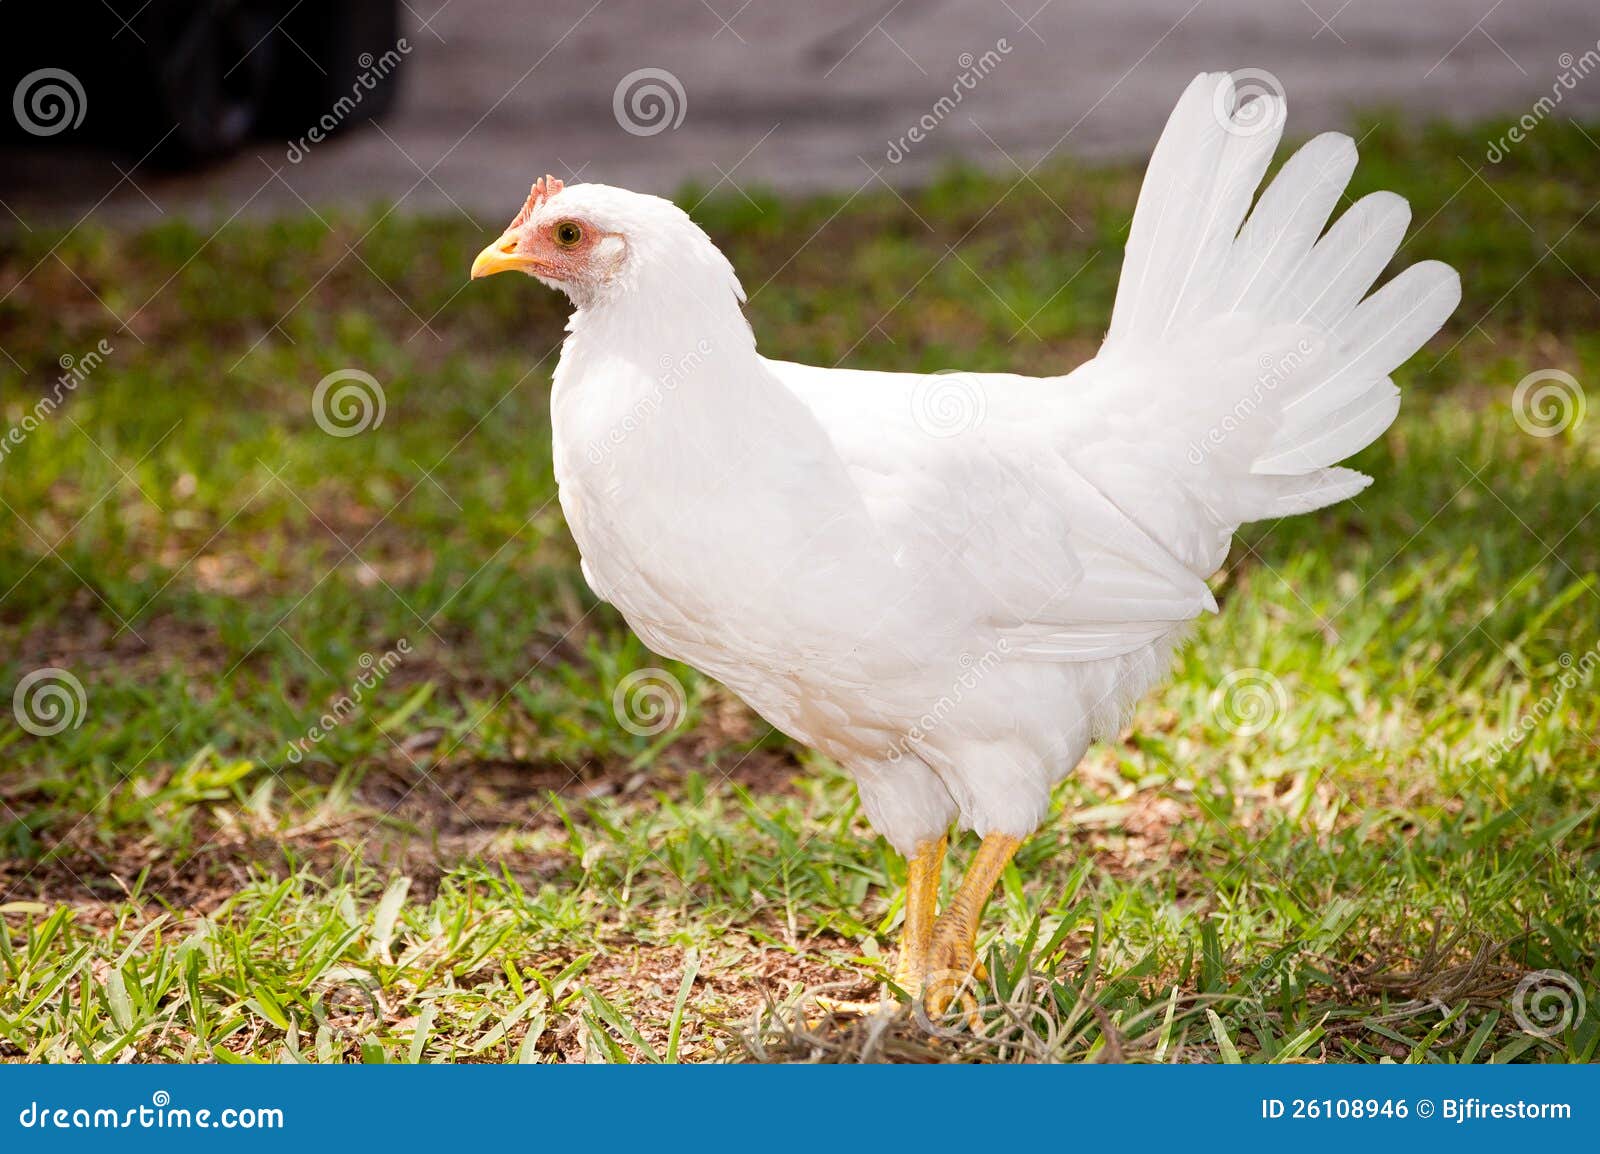 Young Chicken Royalty Free Stock Image - Image: 26108946